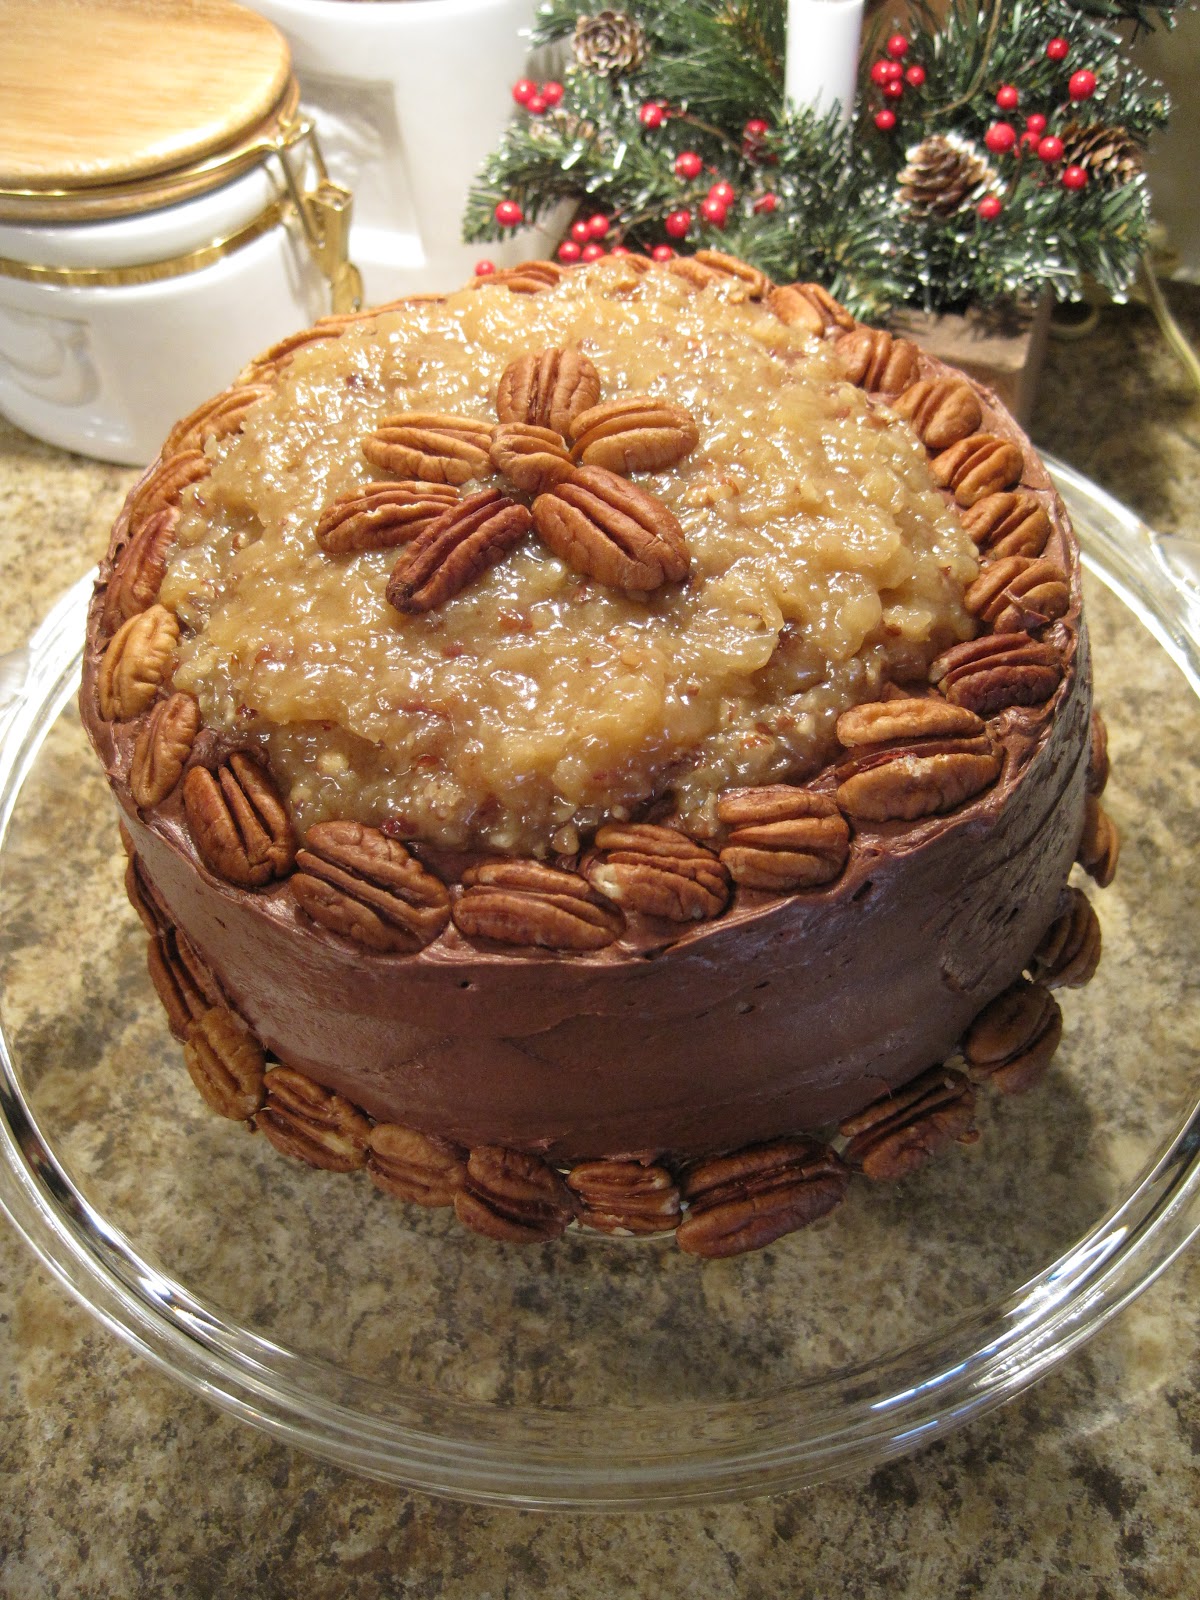 On Crooked Creek: Christmas Cakes.1200 x 1600